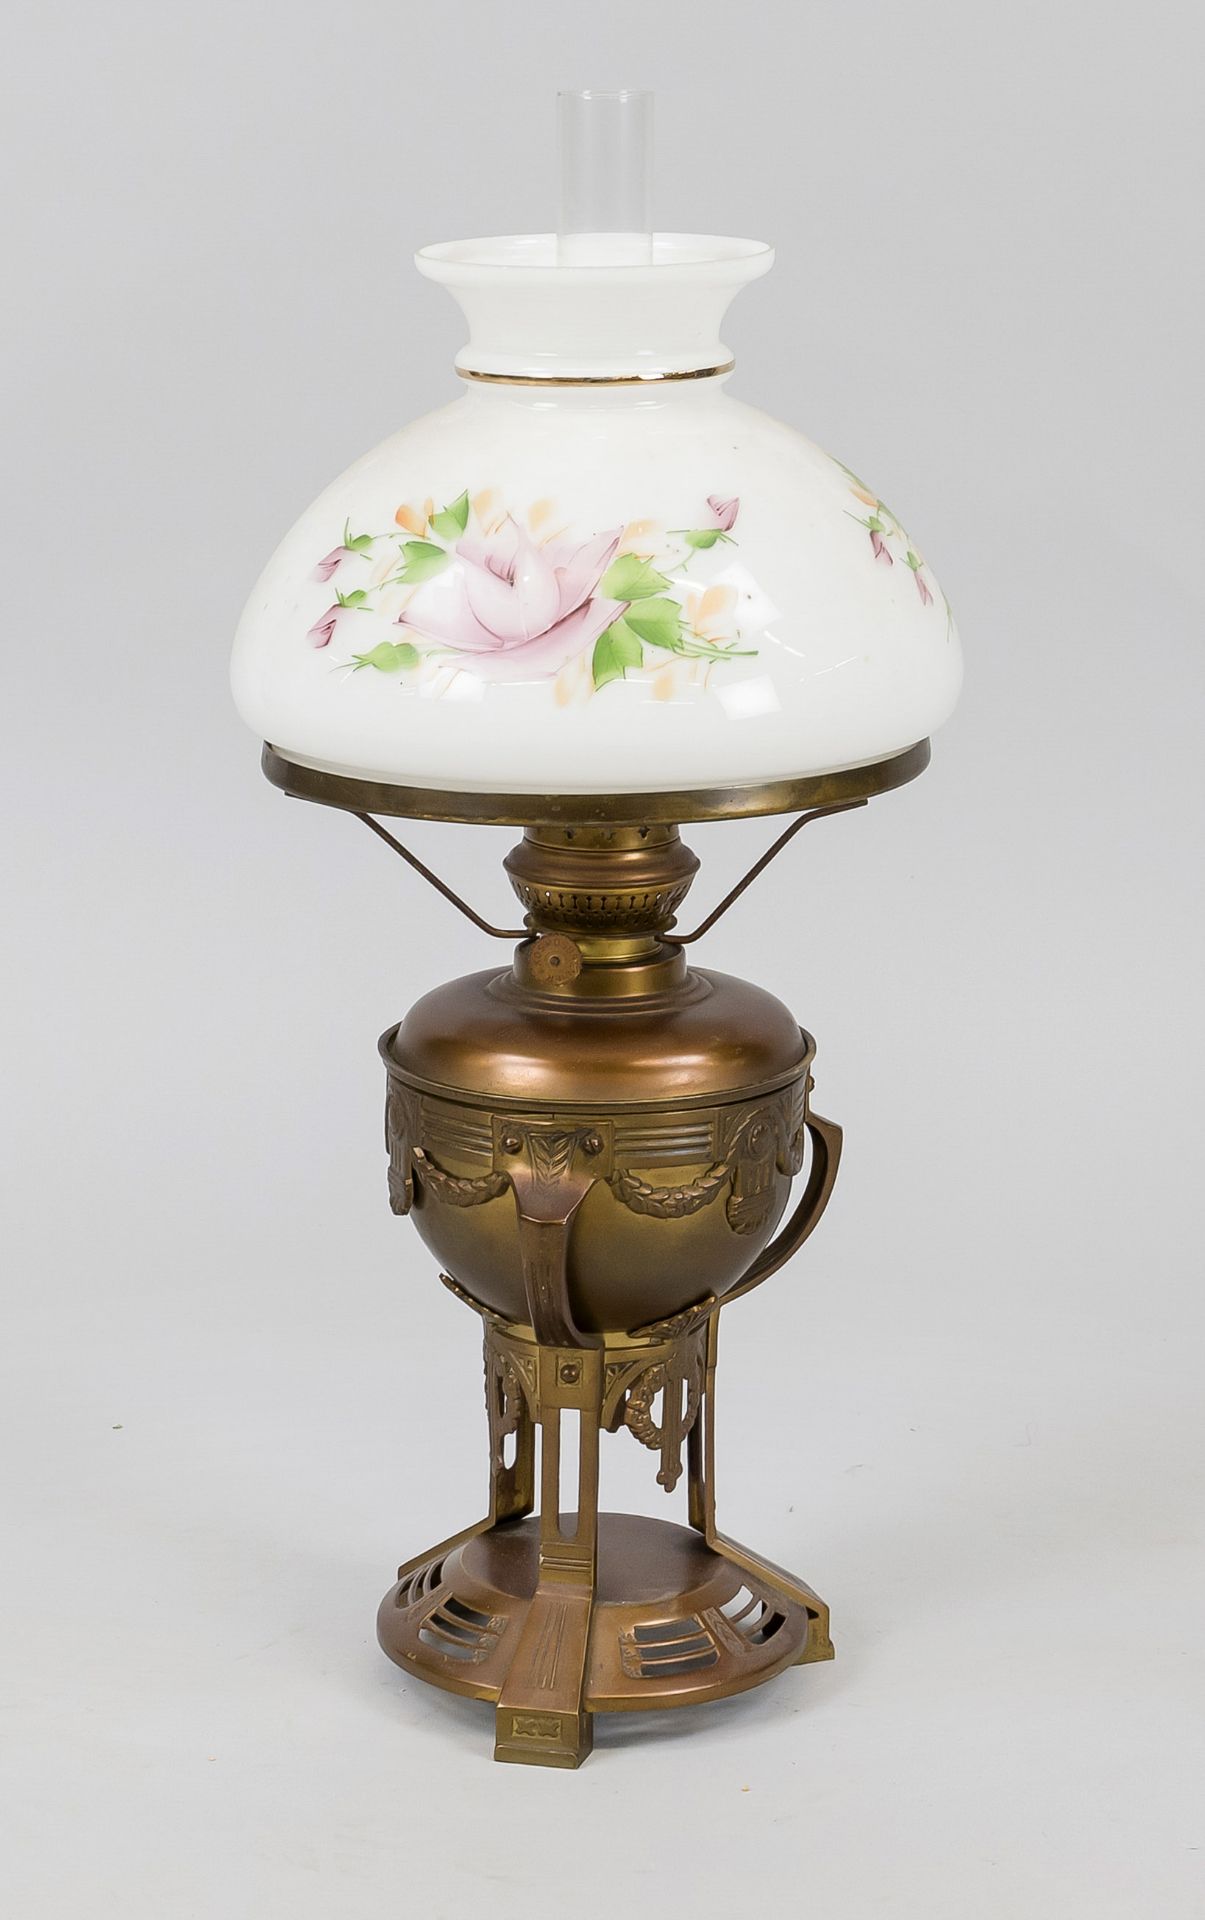 Kerosene lamp, late 19th century, brass/copper. Attached shade of frosted glass with polychrome